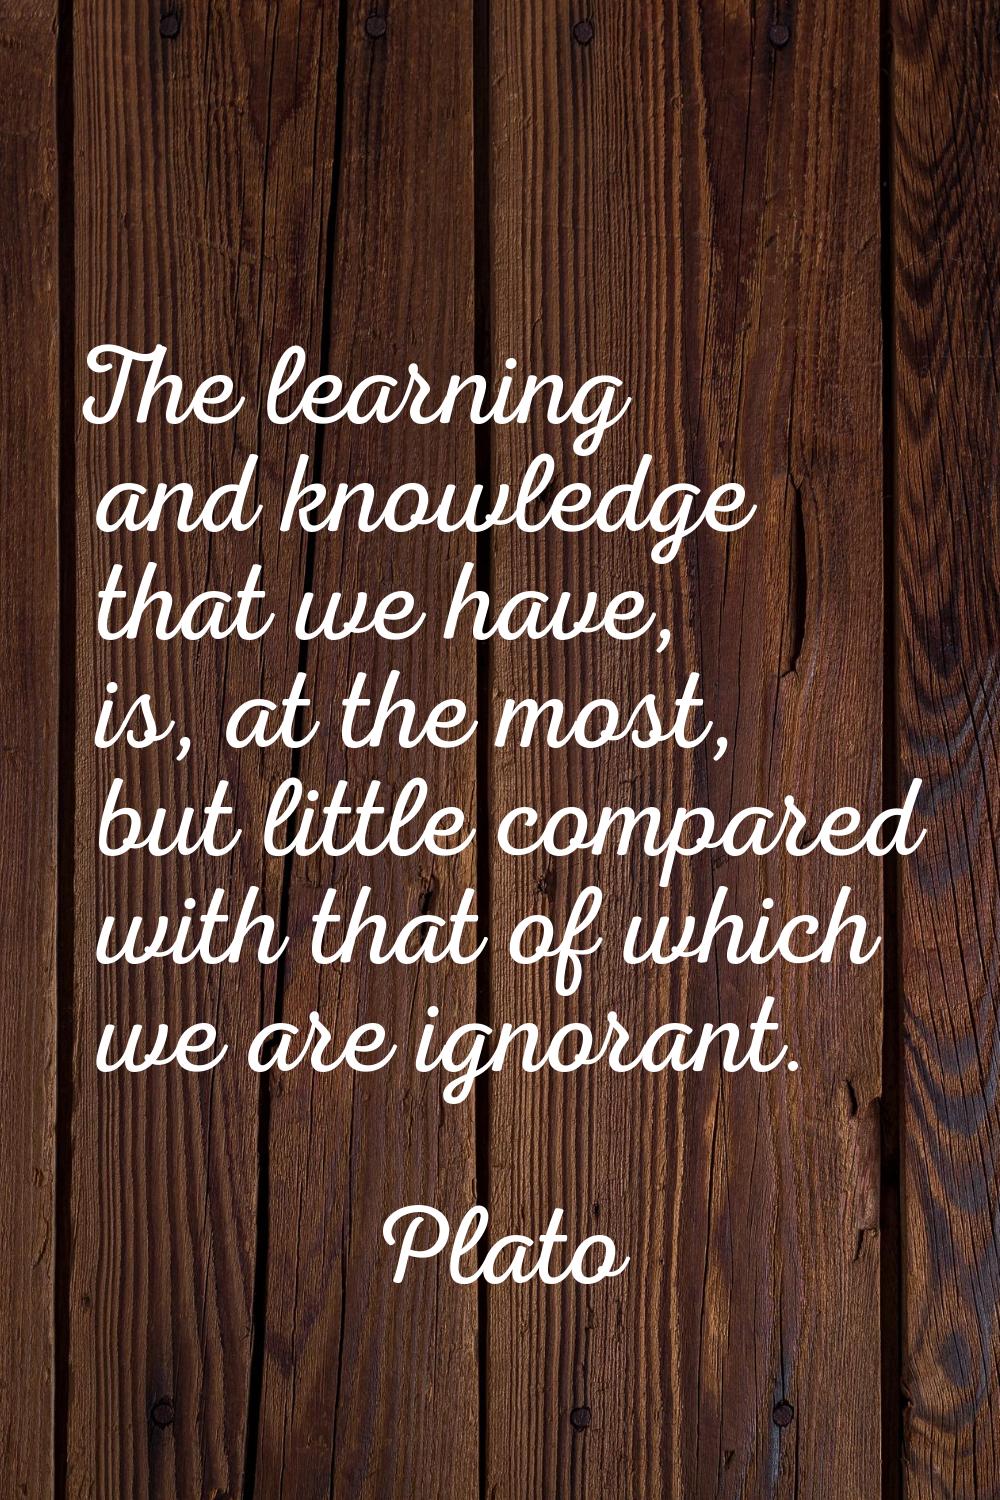 The learning and knowledge that we have, is, at the most, but little compared with that of which we